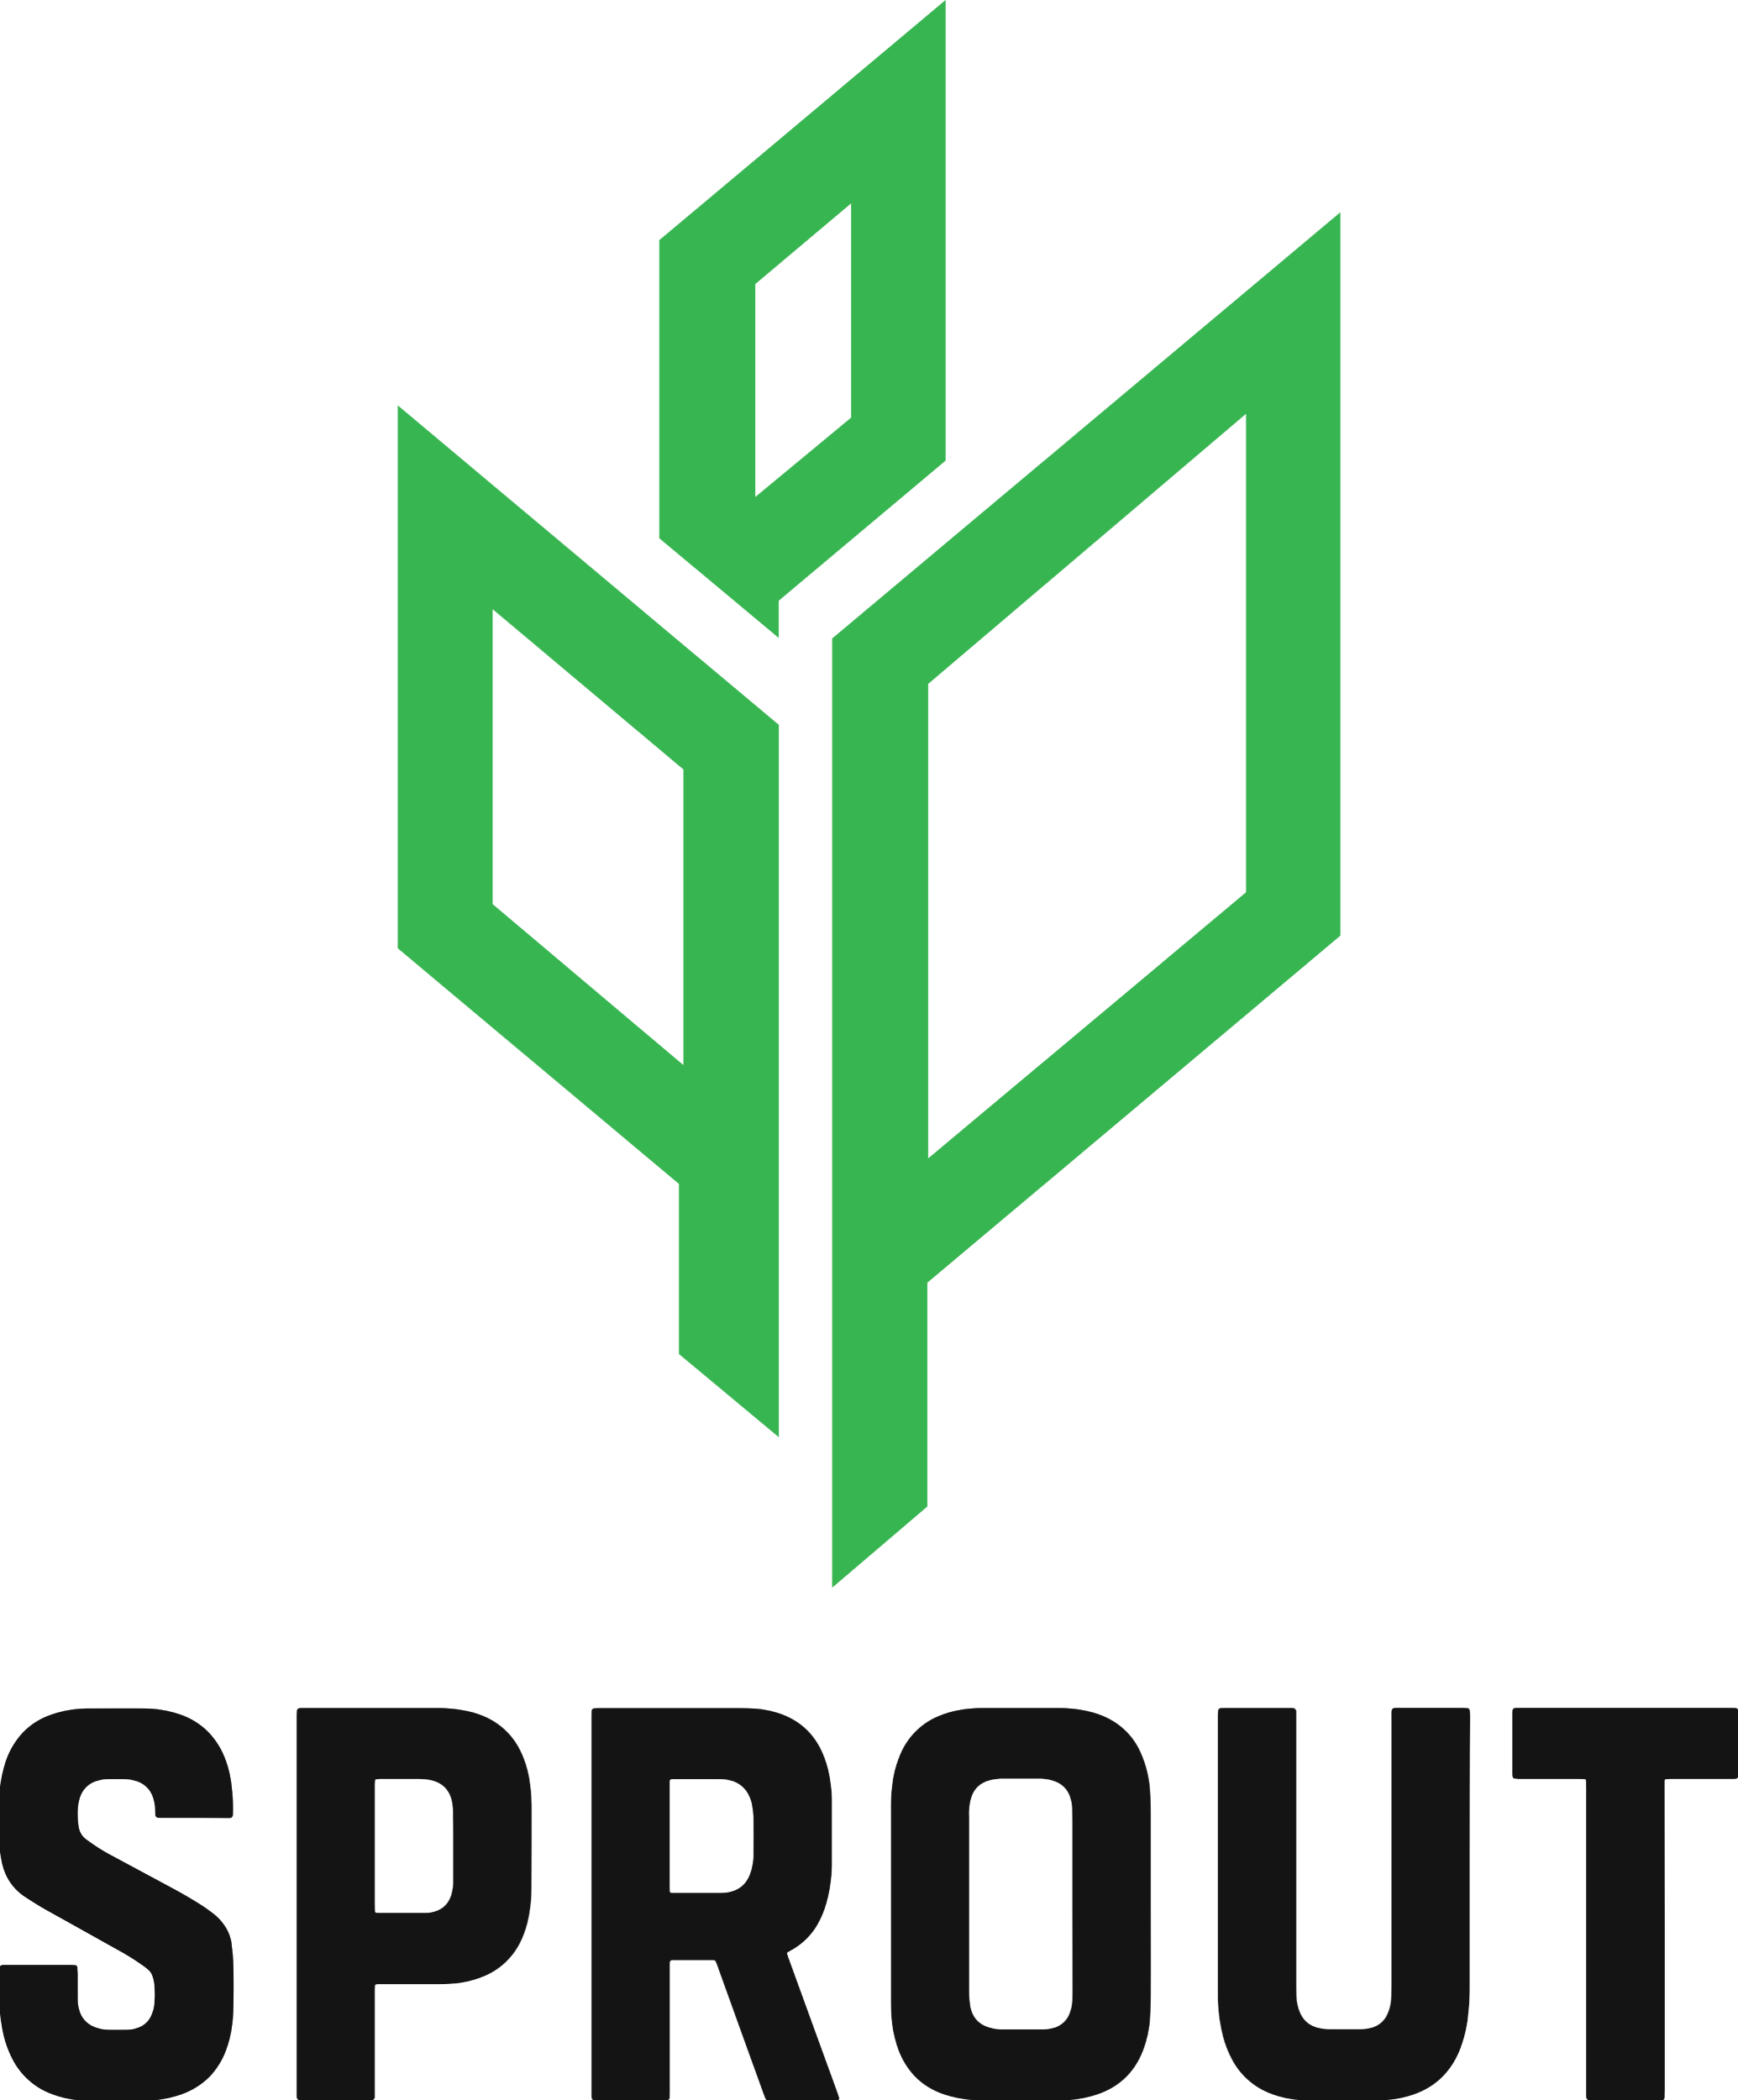 CS Sprout